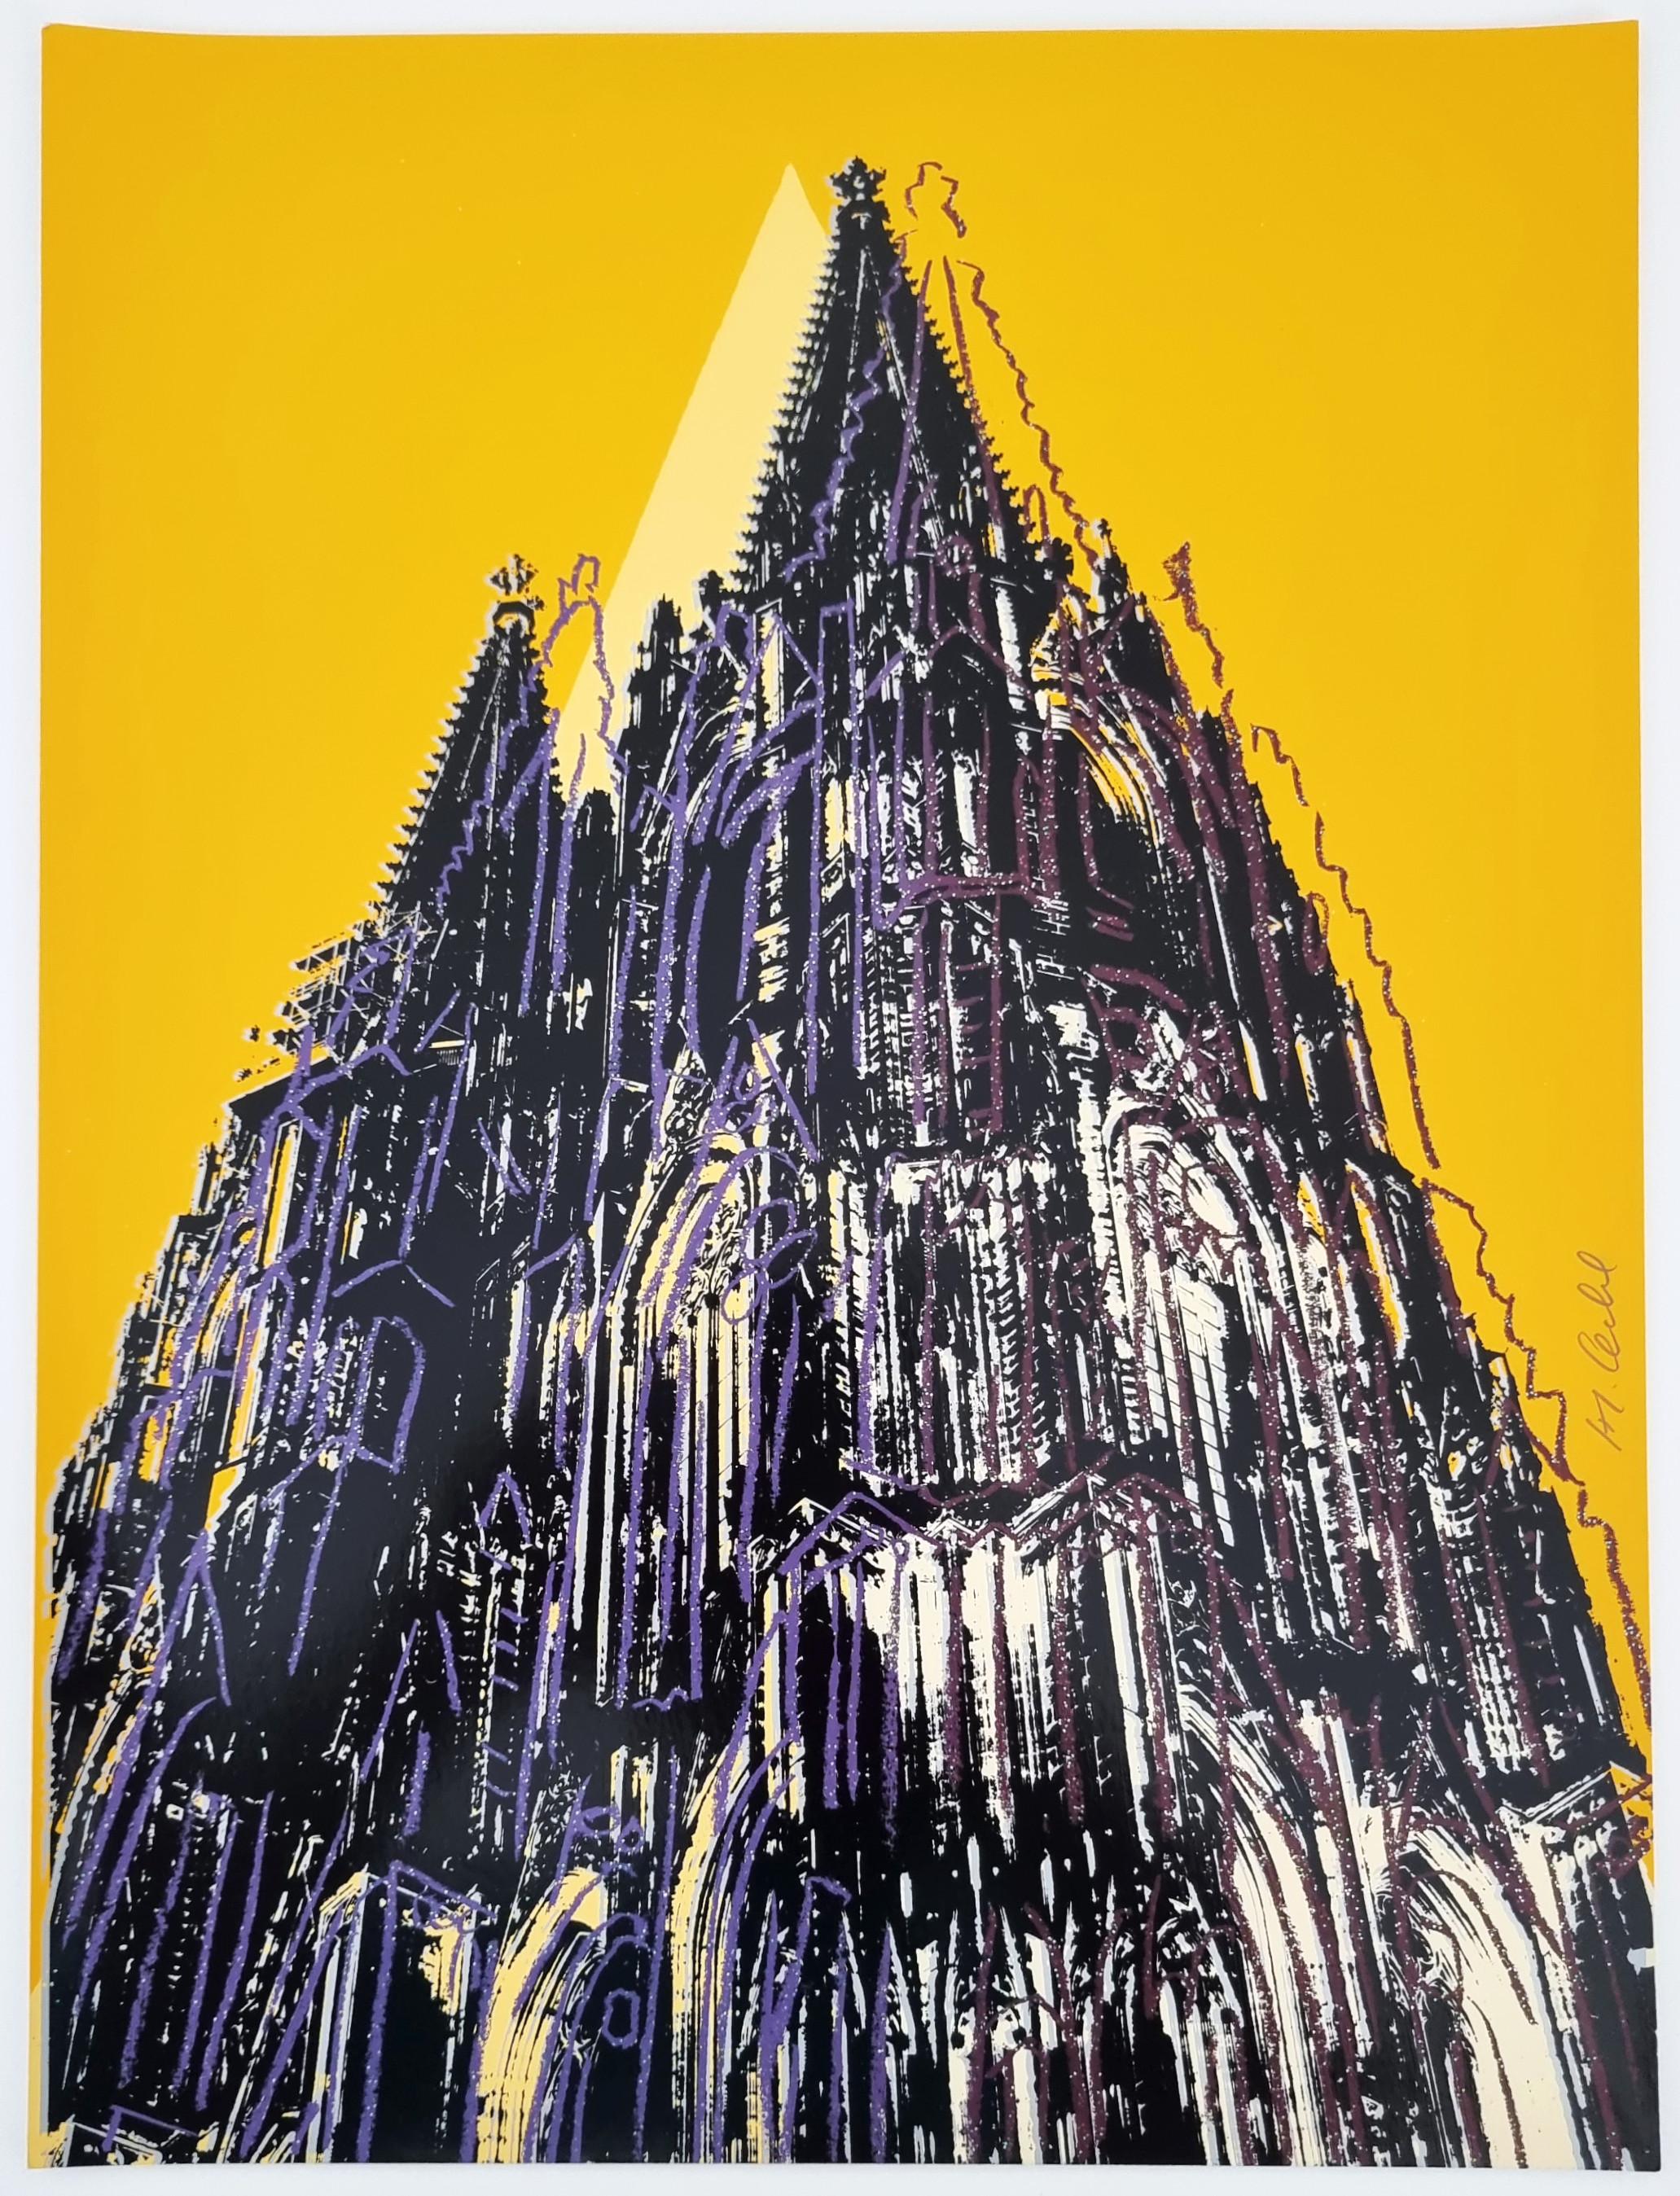 Cologne Cathedral (Yellow) with Glitter (Pop Art, Andy Warhol)  - Print by Jurgen Kuhl 